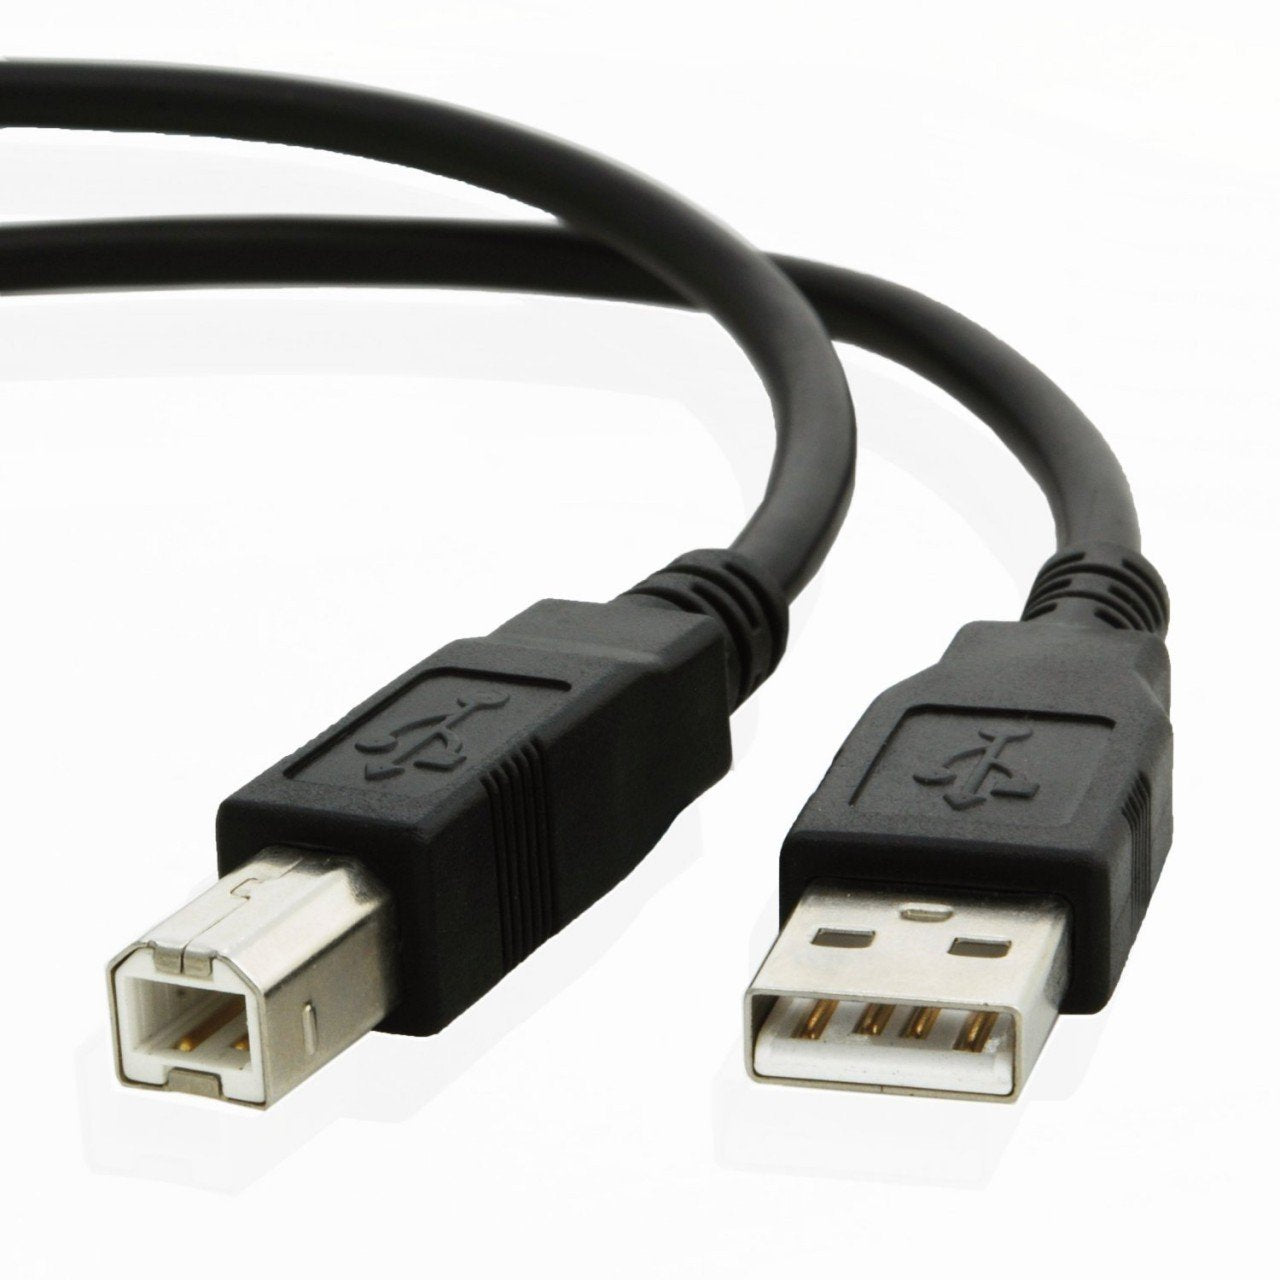 USB cable for Canon PIXMA IP2820